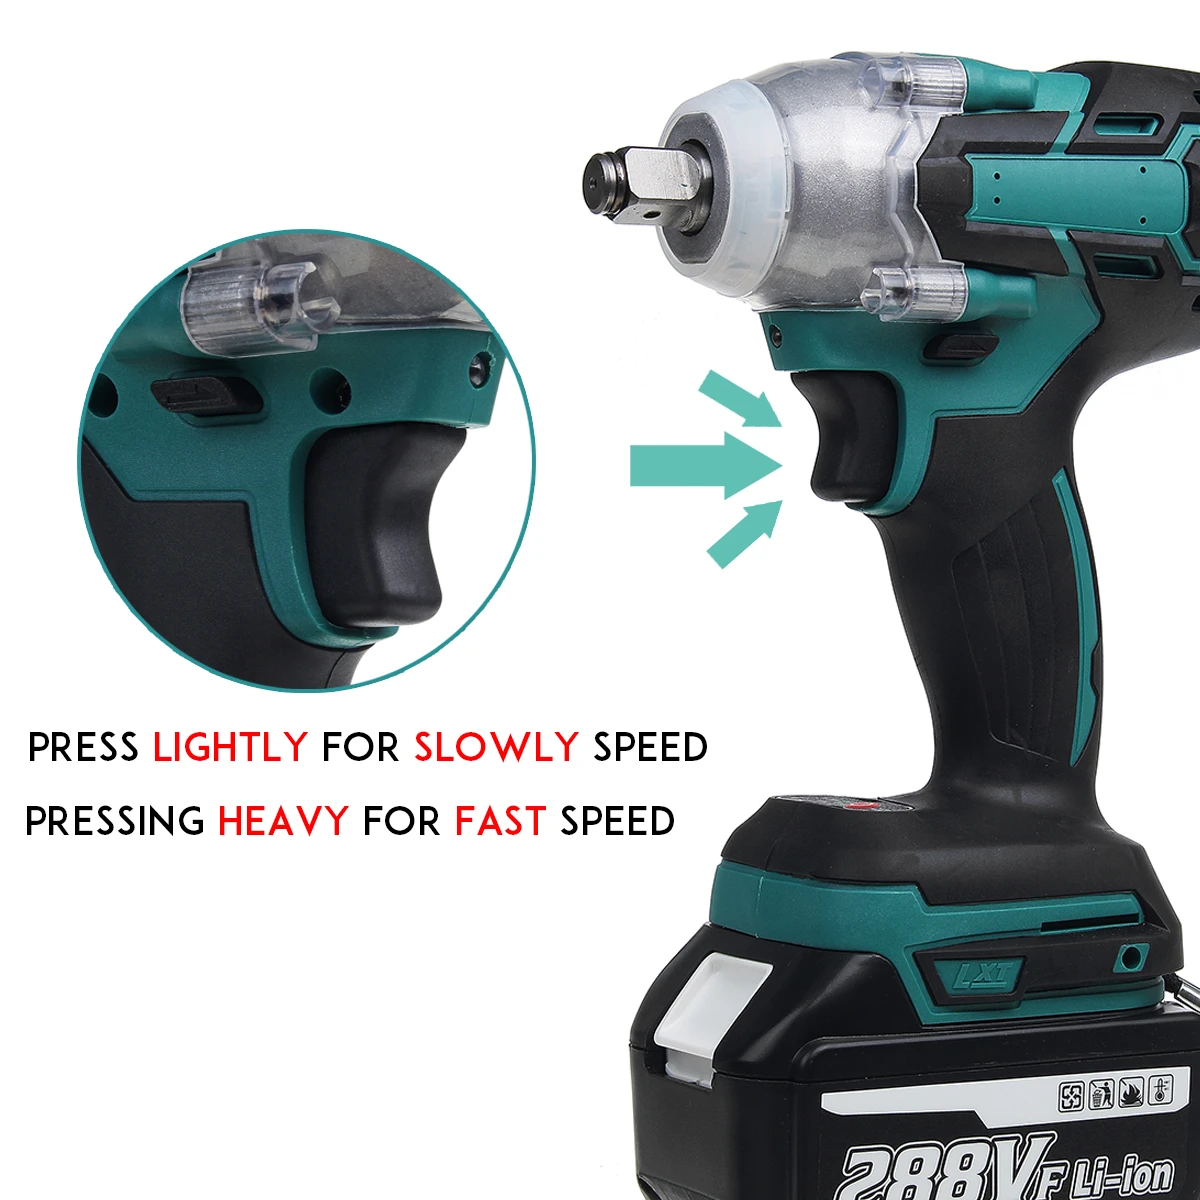 VIOLEWORKS 288VF 1/2'' Electric Cordless Brushless Impact Wrench With